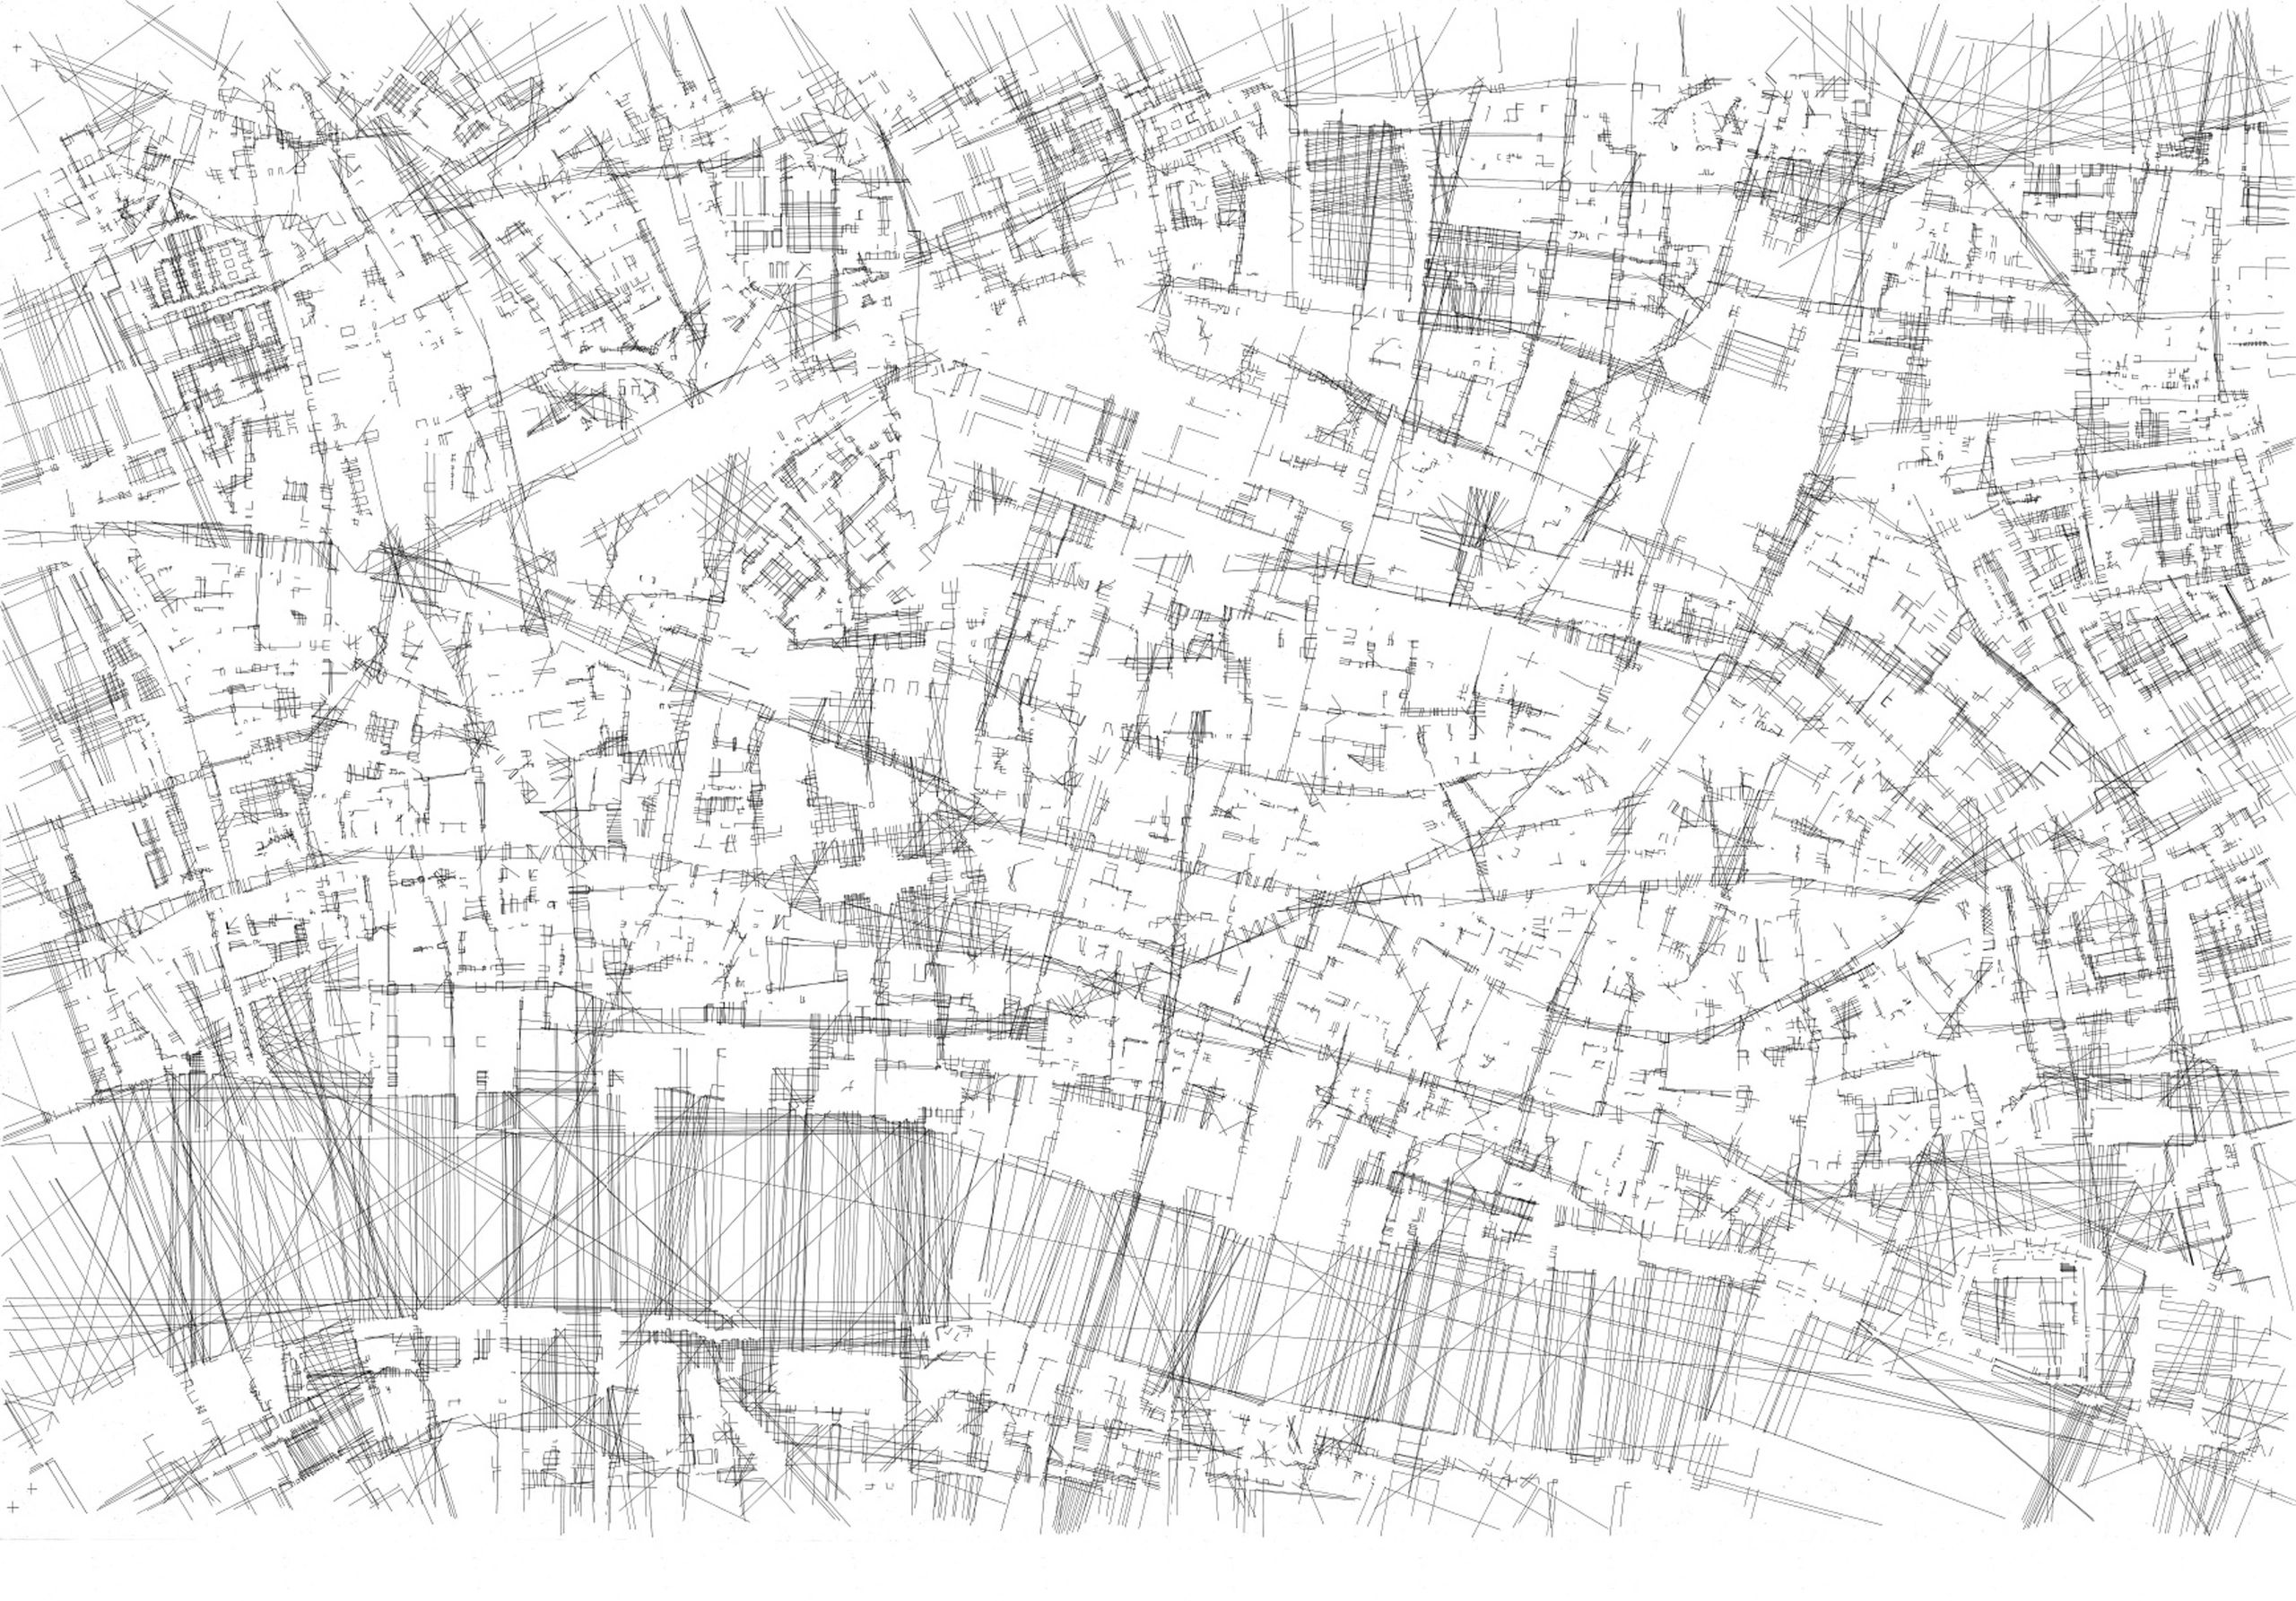 London Extent 
Hand Drawn 
Ink on Architectural Film
2013